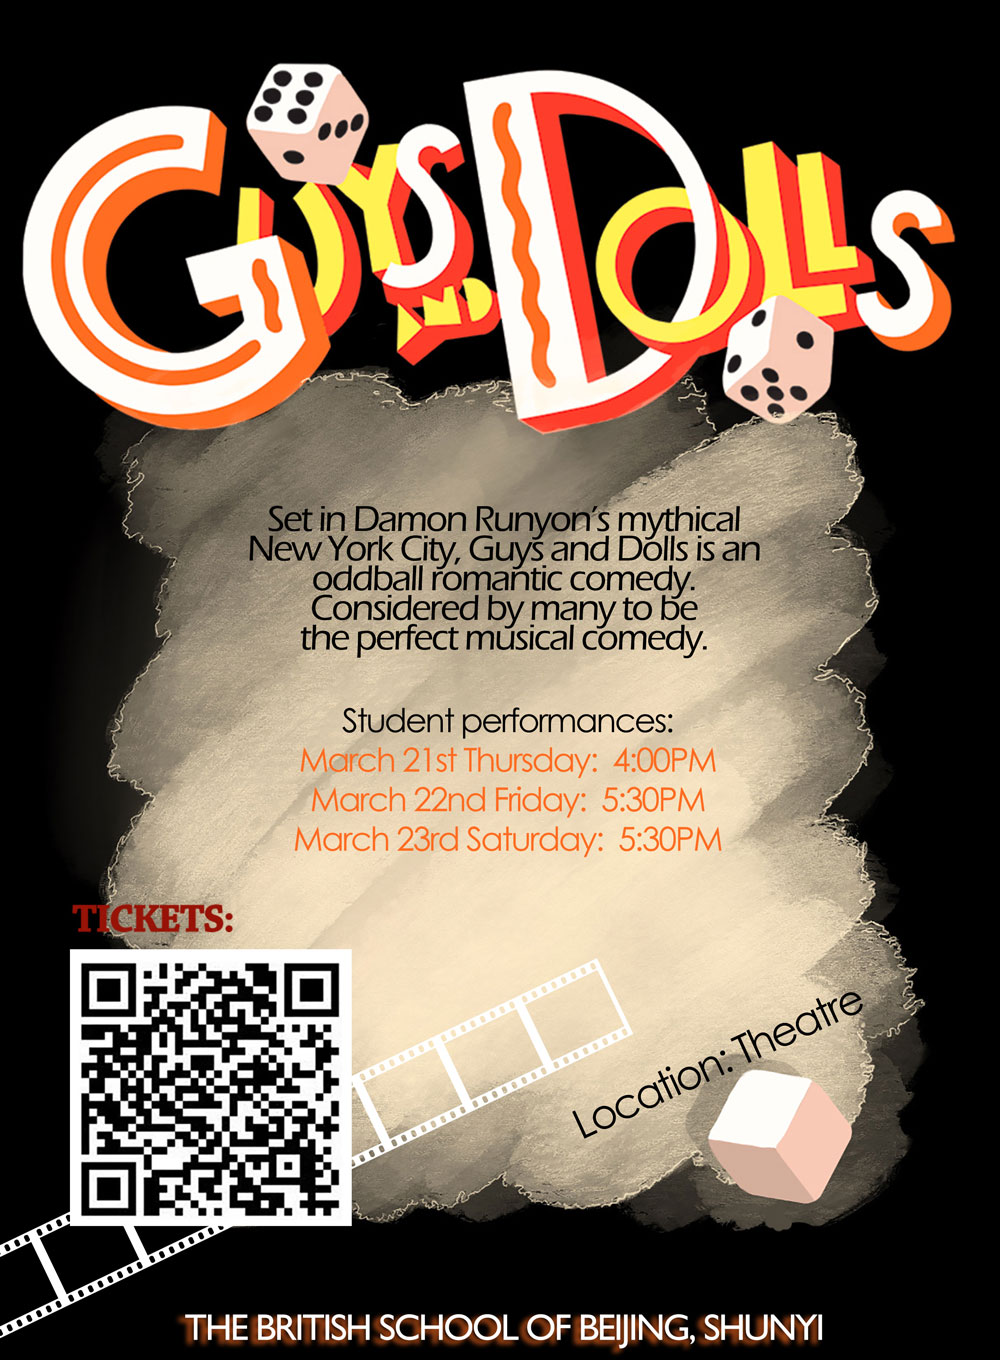 Get your tickets to BSB Musical Guys and Dolls - Get your tickets to BSB Musical Guys and Dolls